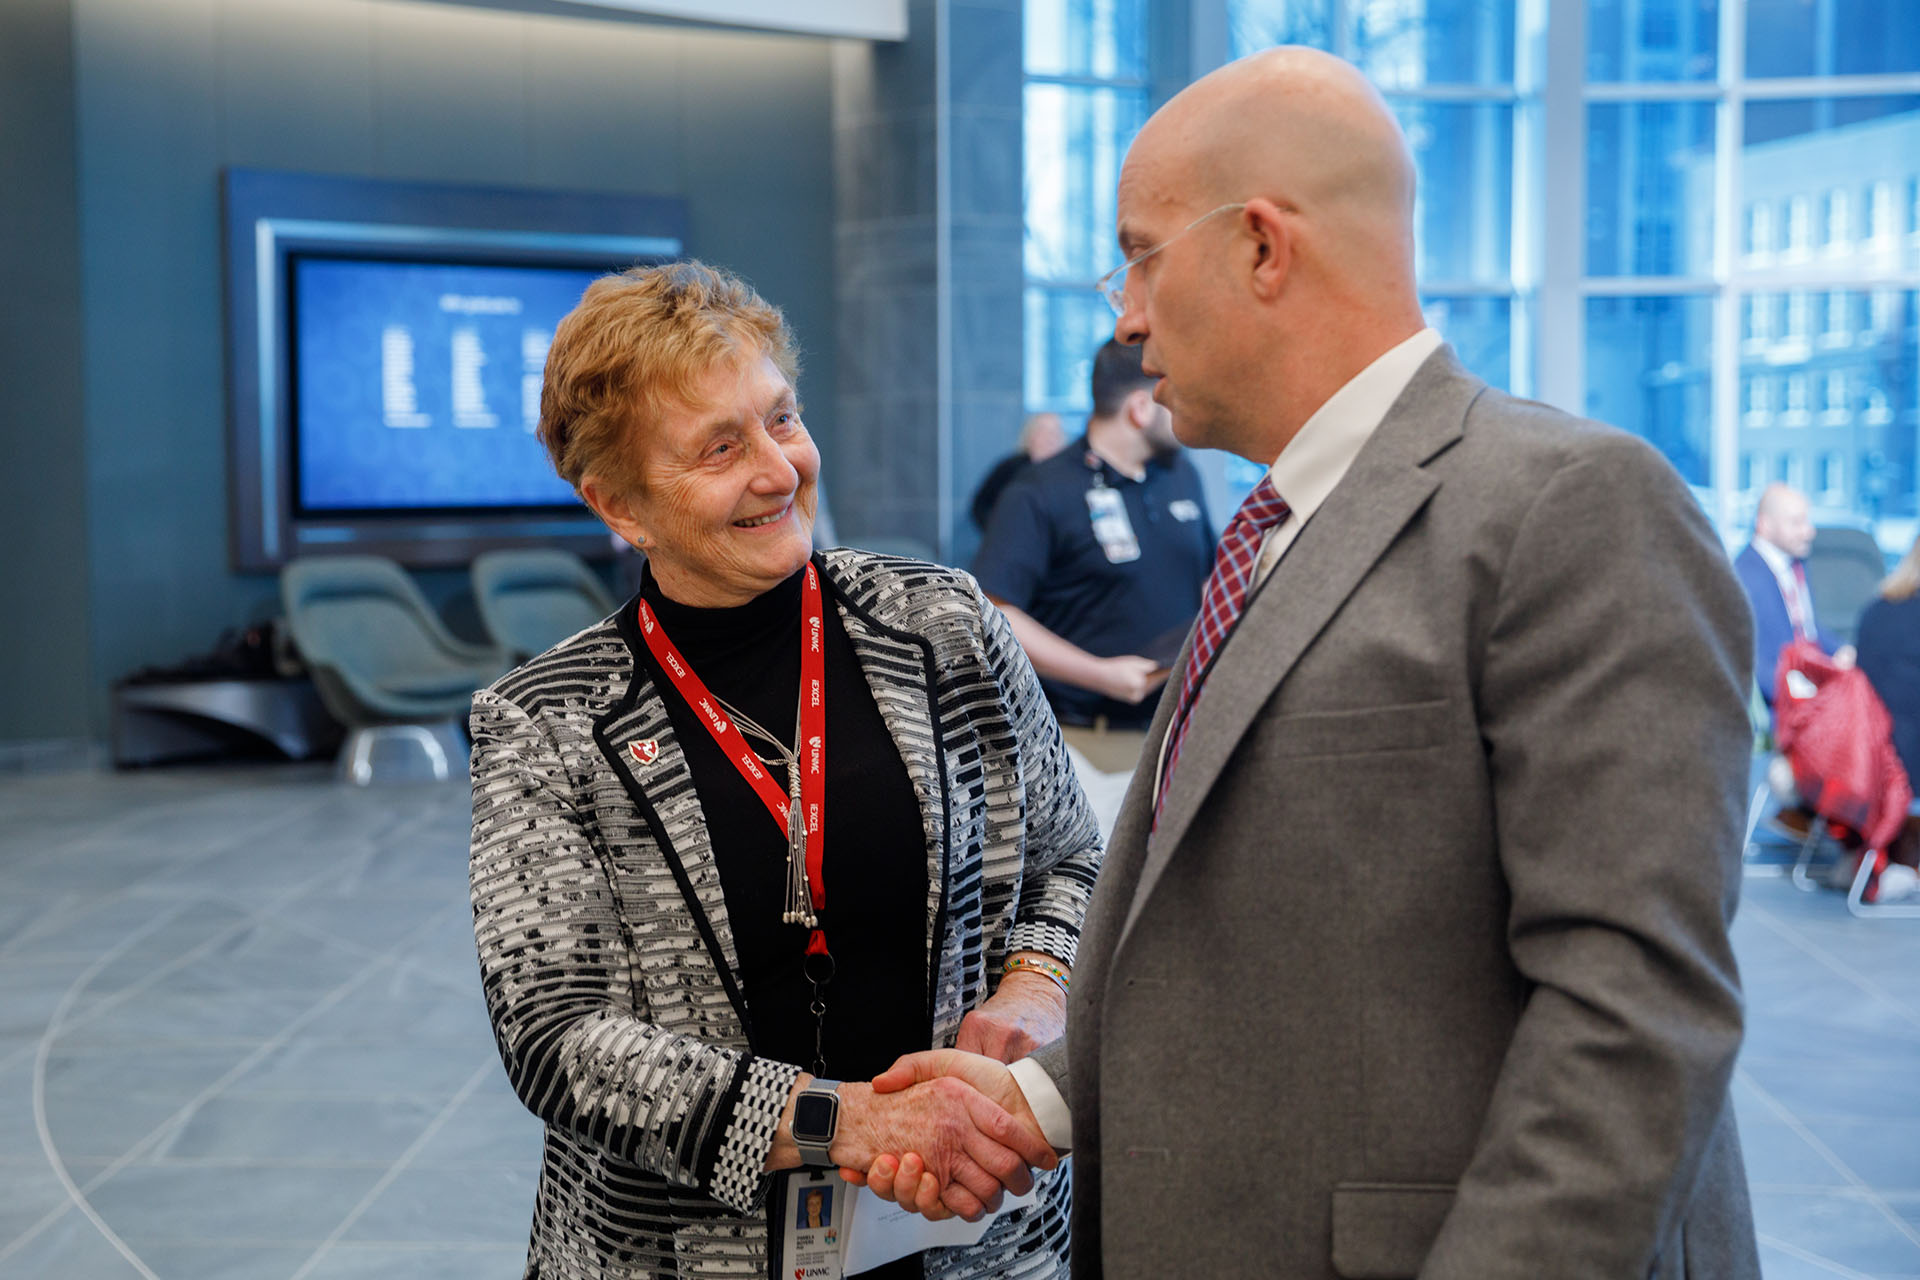 Pamela Boyers&comma; PhD&comma; associate vice chancellor for clinical simulation&comma; congratulates William Thorell&comma; MD&comma; winner of the Impact Award from iEXCEL&period;